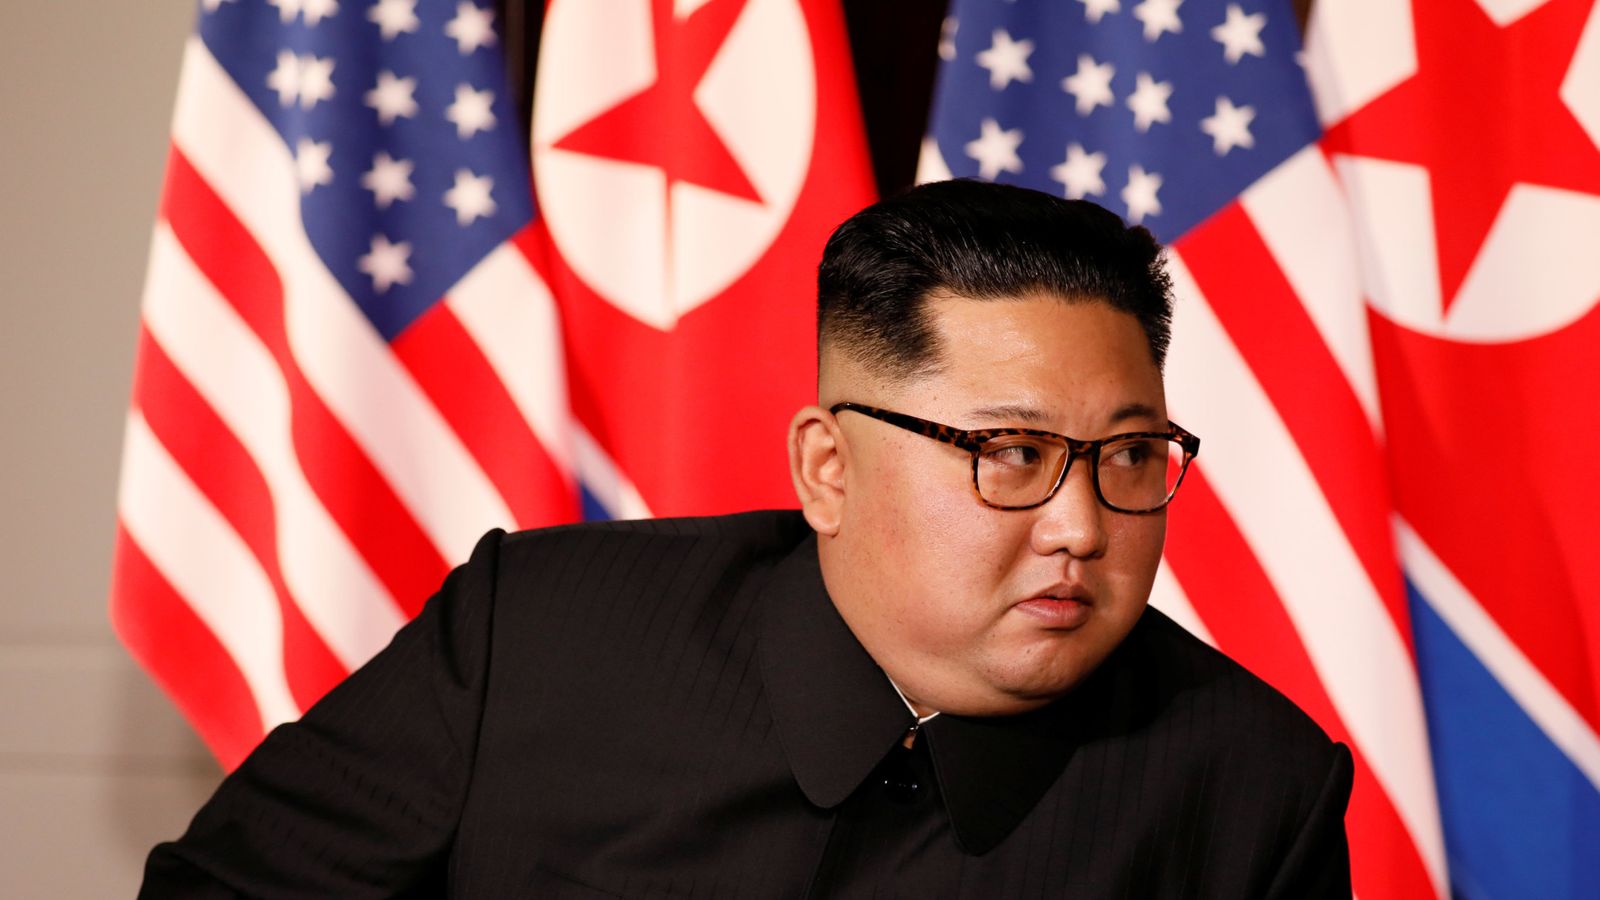 After Korea summit, Kim Jong Un will never be laughed at again | World ...